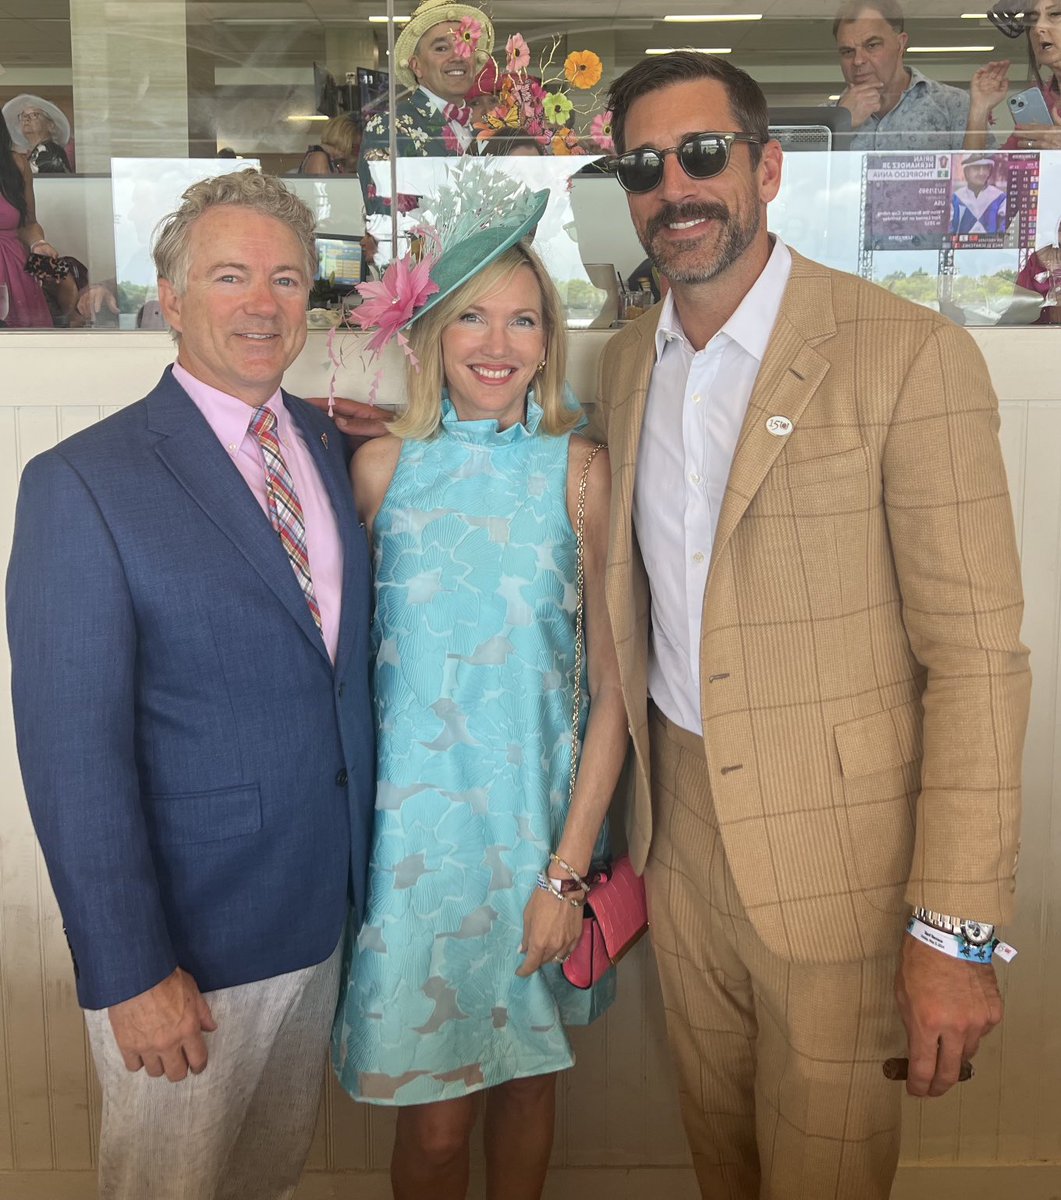 Rand and I enjoyed meeting the great football player and champion of medical freedom ⁦@AaronRodgers12⁩ yesterday at the Kentucky Oaks races!